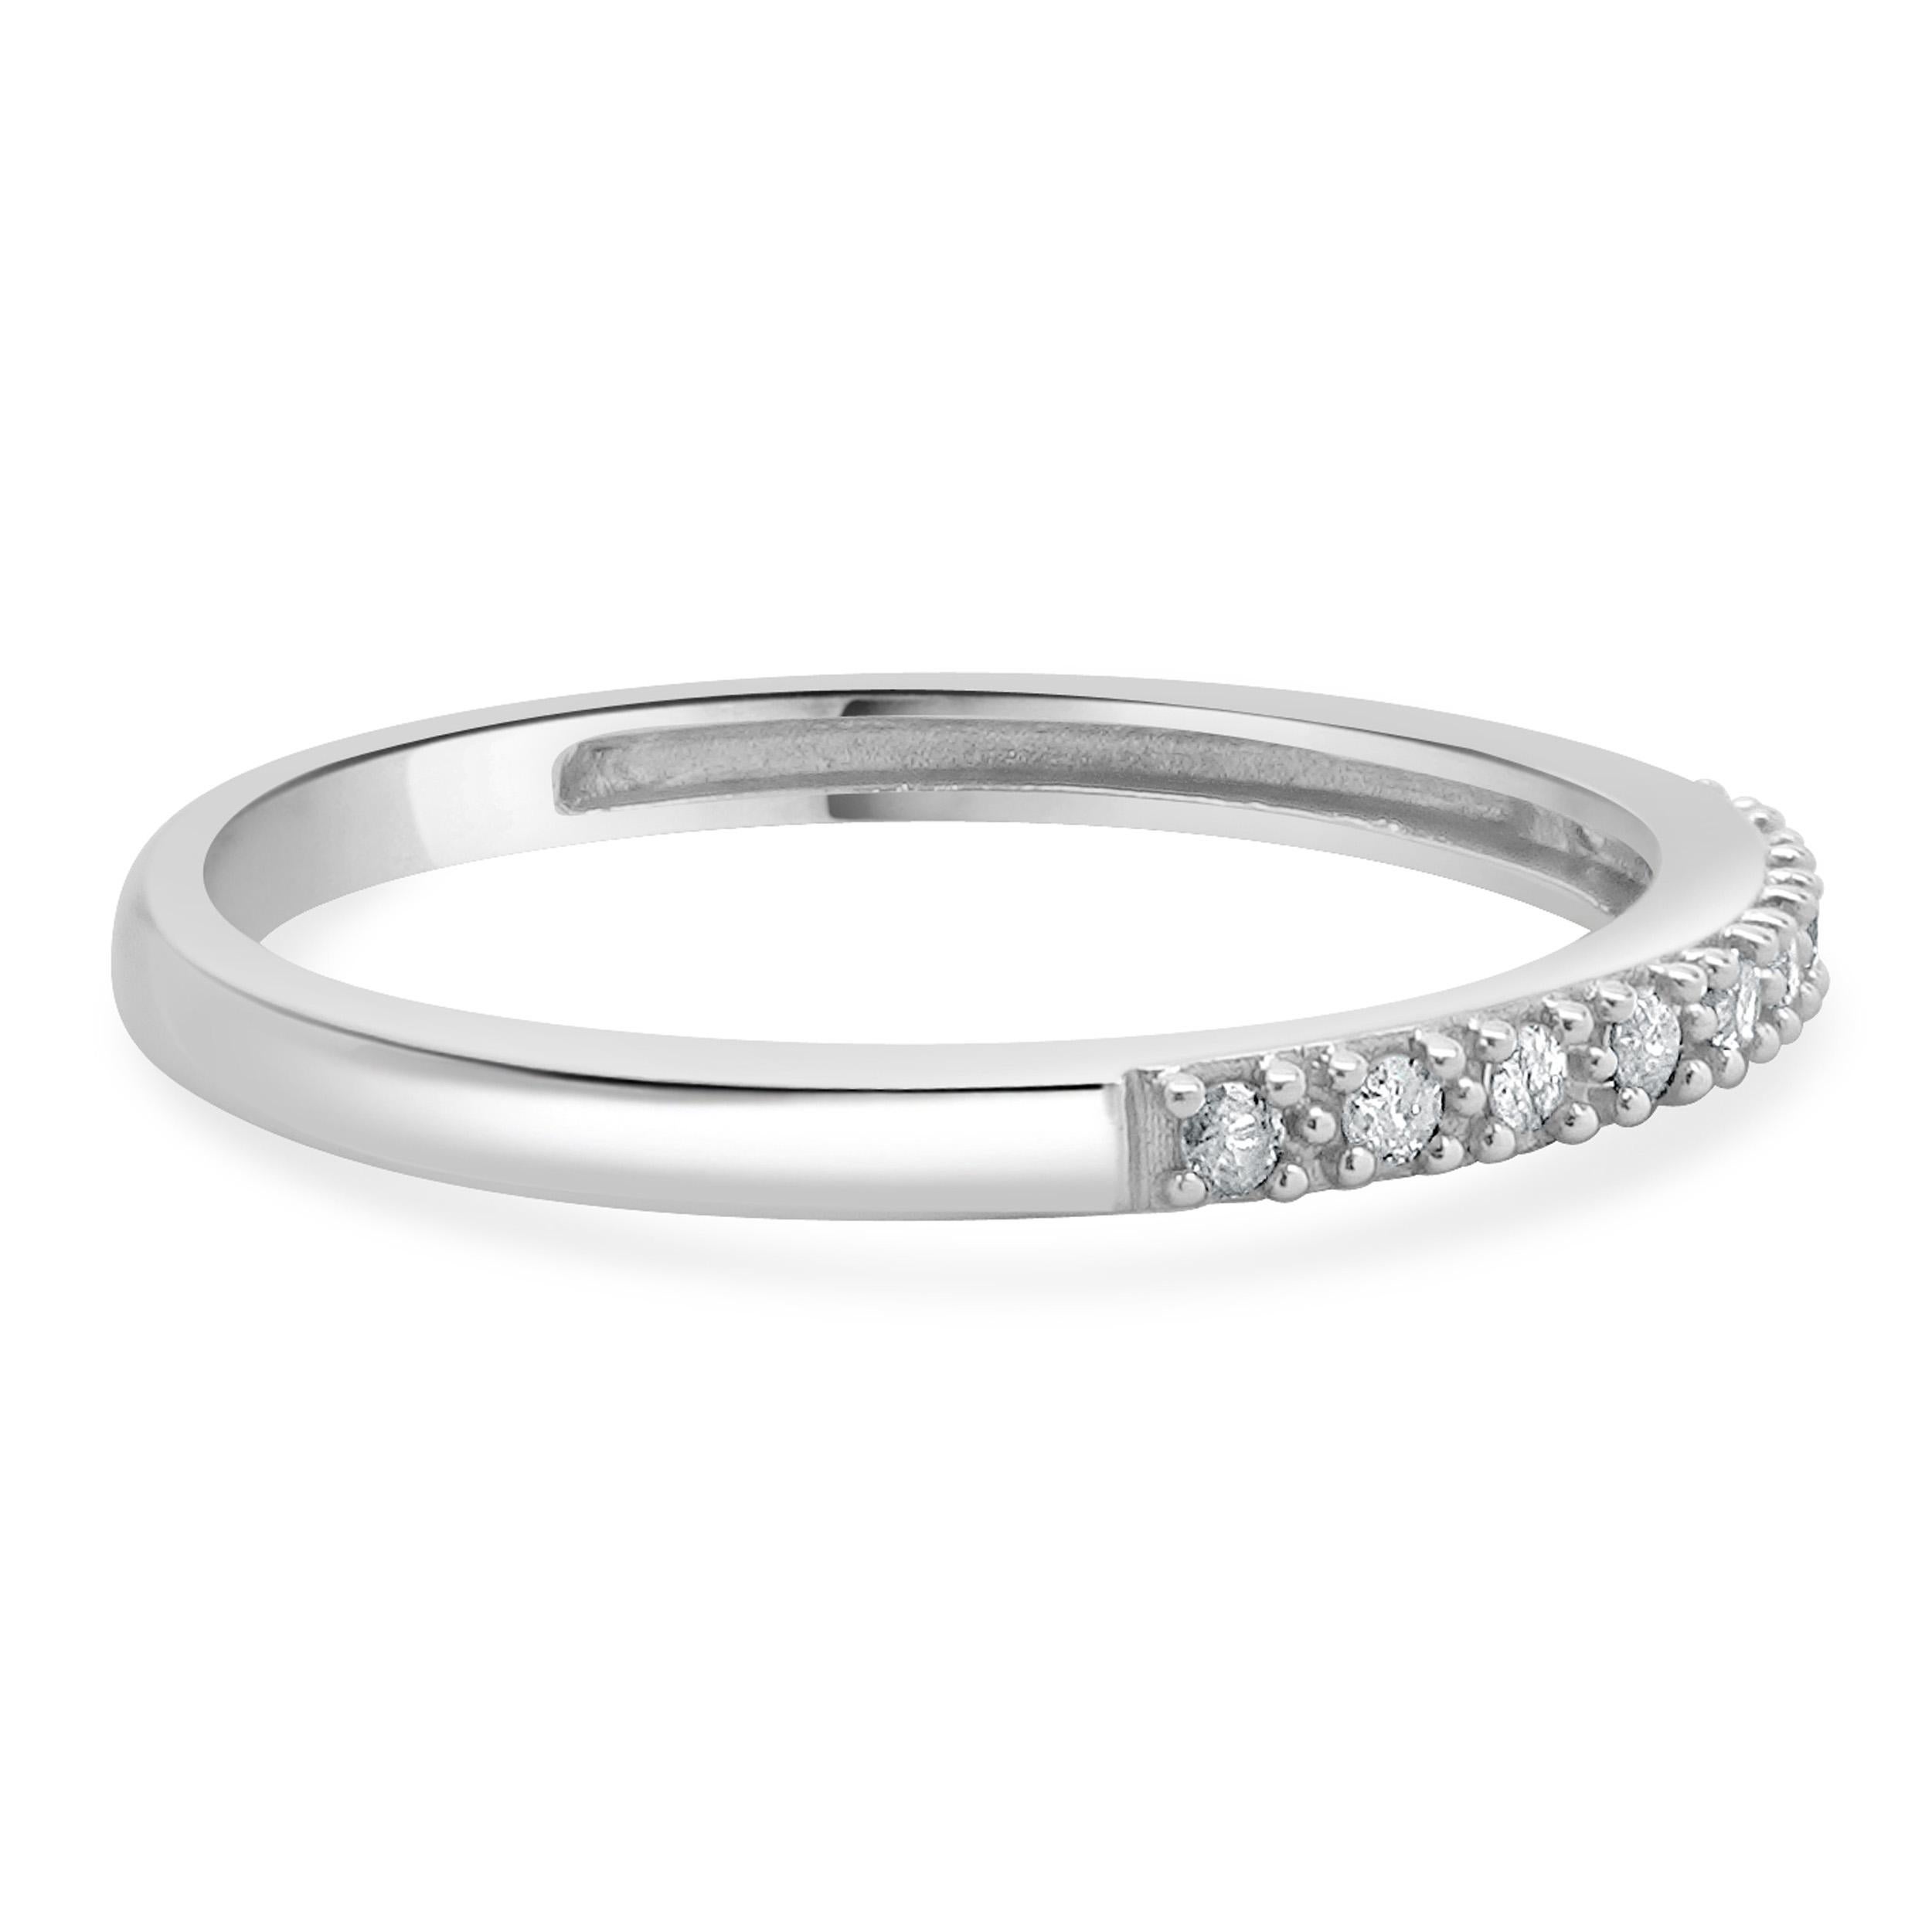 10 Karat White Gold Diamond Band In Excellent Condition For Sale In Scottsdale, AZ